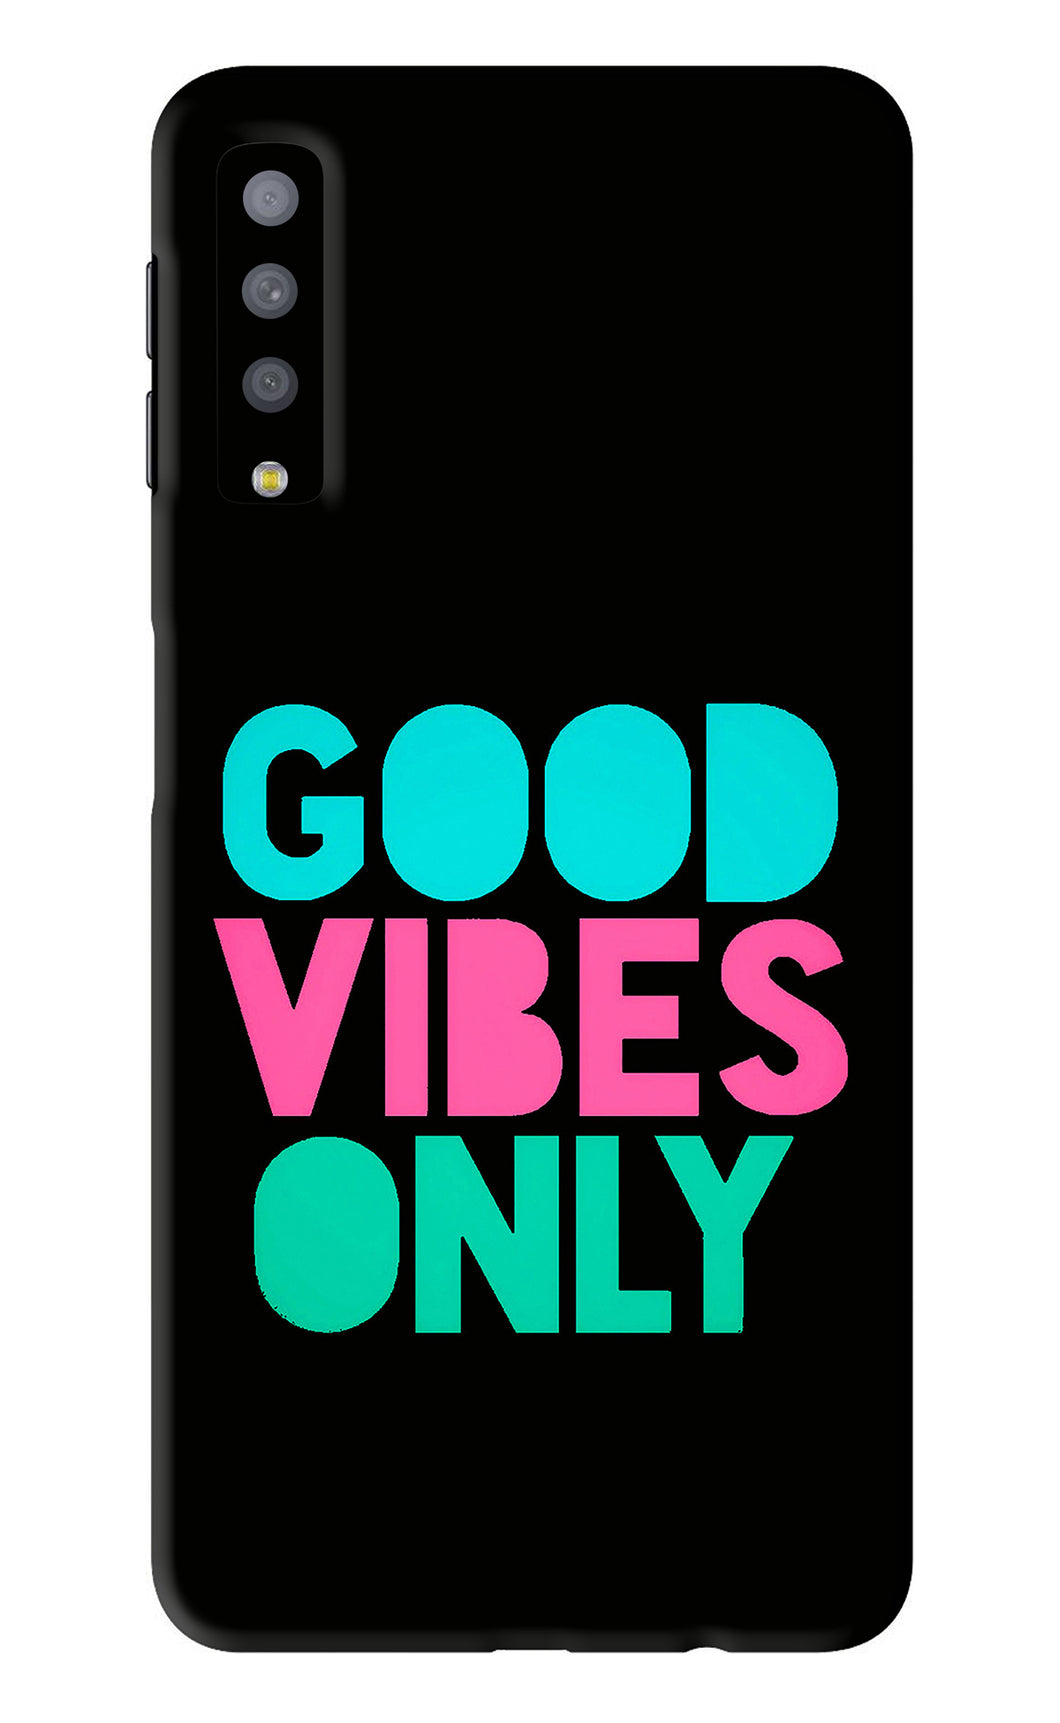 Quote Good Vibes Only Samsung Galaxy A7 2018 Back Skin Wrap